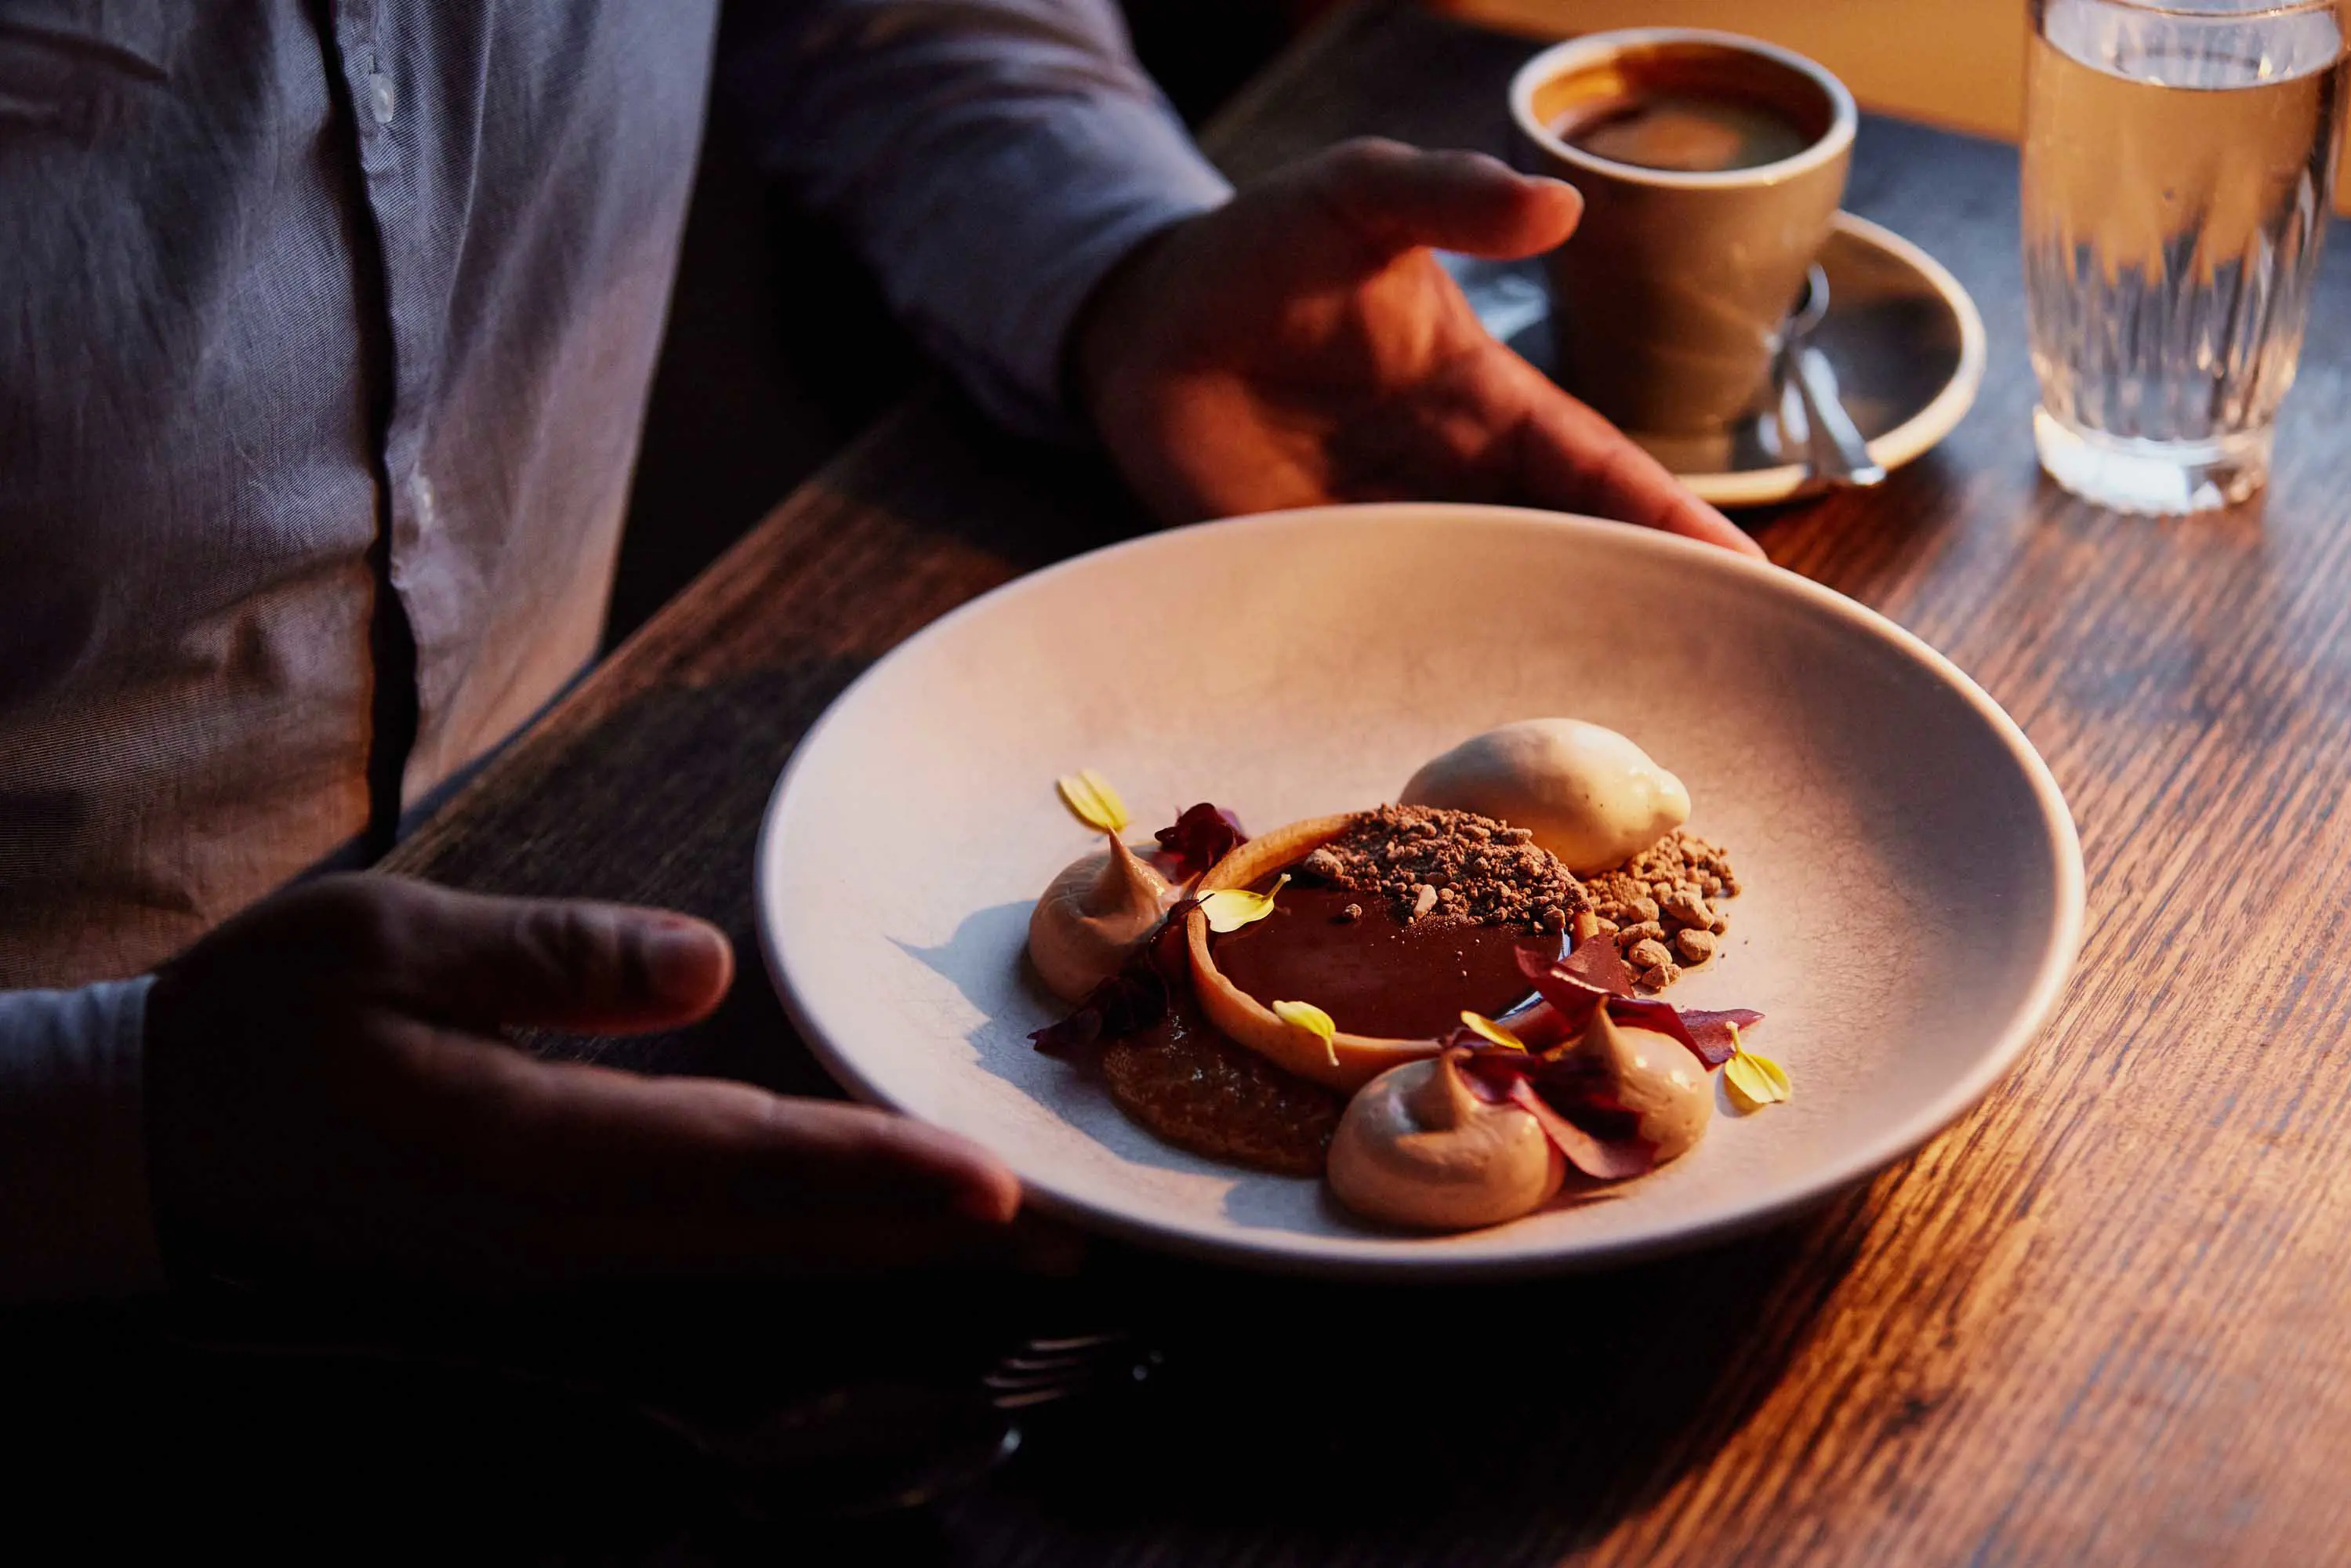 A waiter places a earthenware dish with a dessert onto a dark wooden table.